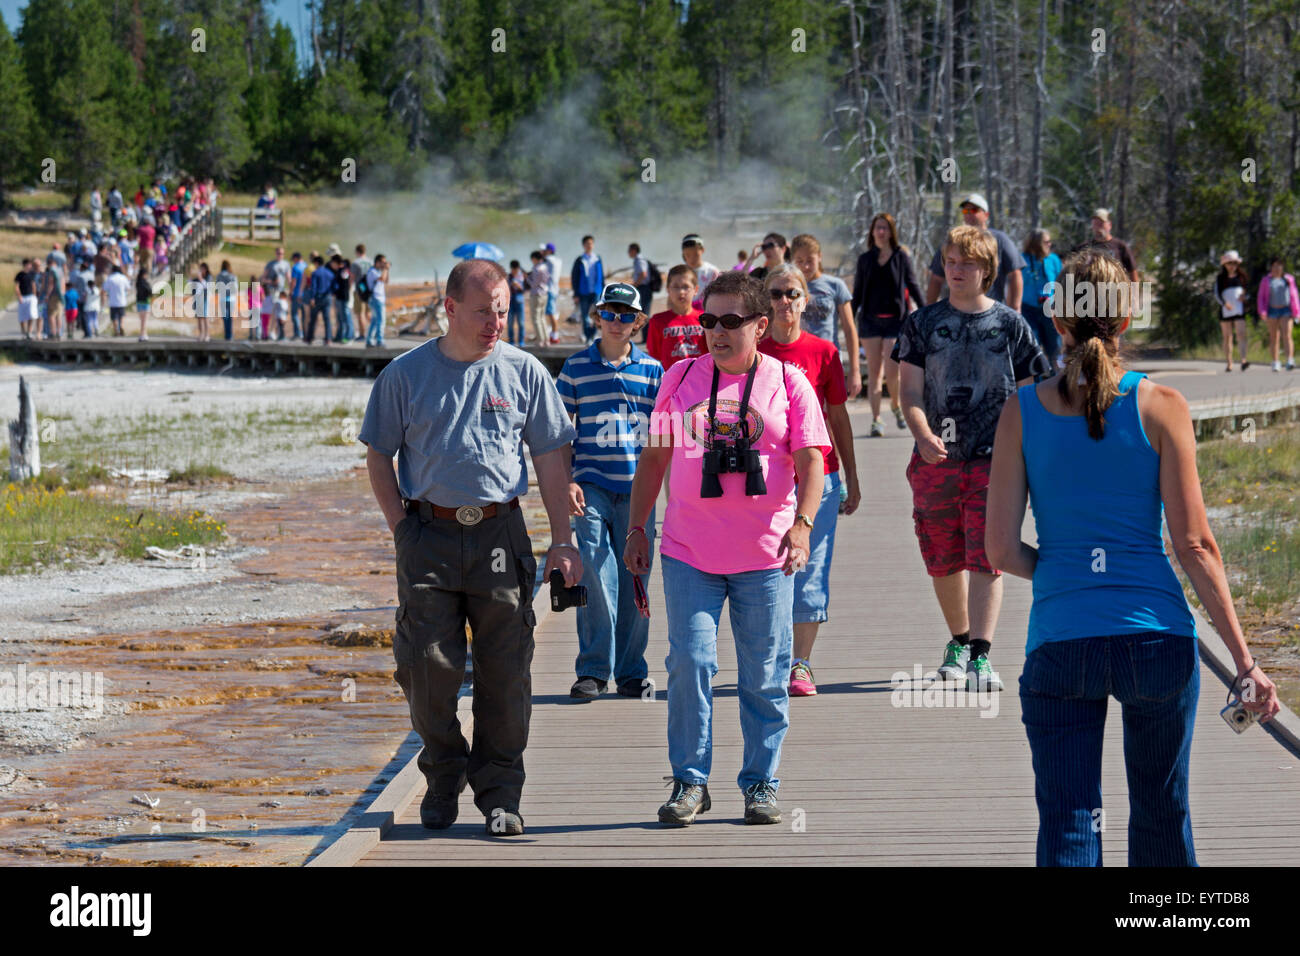 Yellowstone National Park, Wyoming - Tourists crowd the boardwalks in Yellowstone's Lower Geyser Basin. Stock Photo